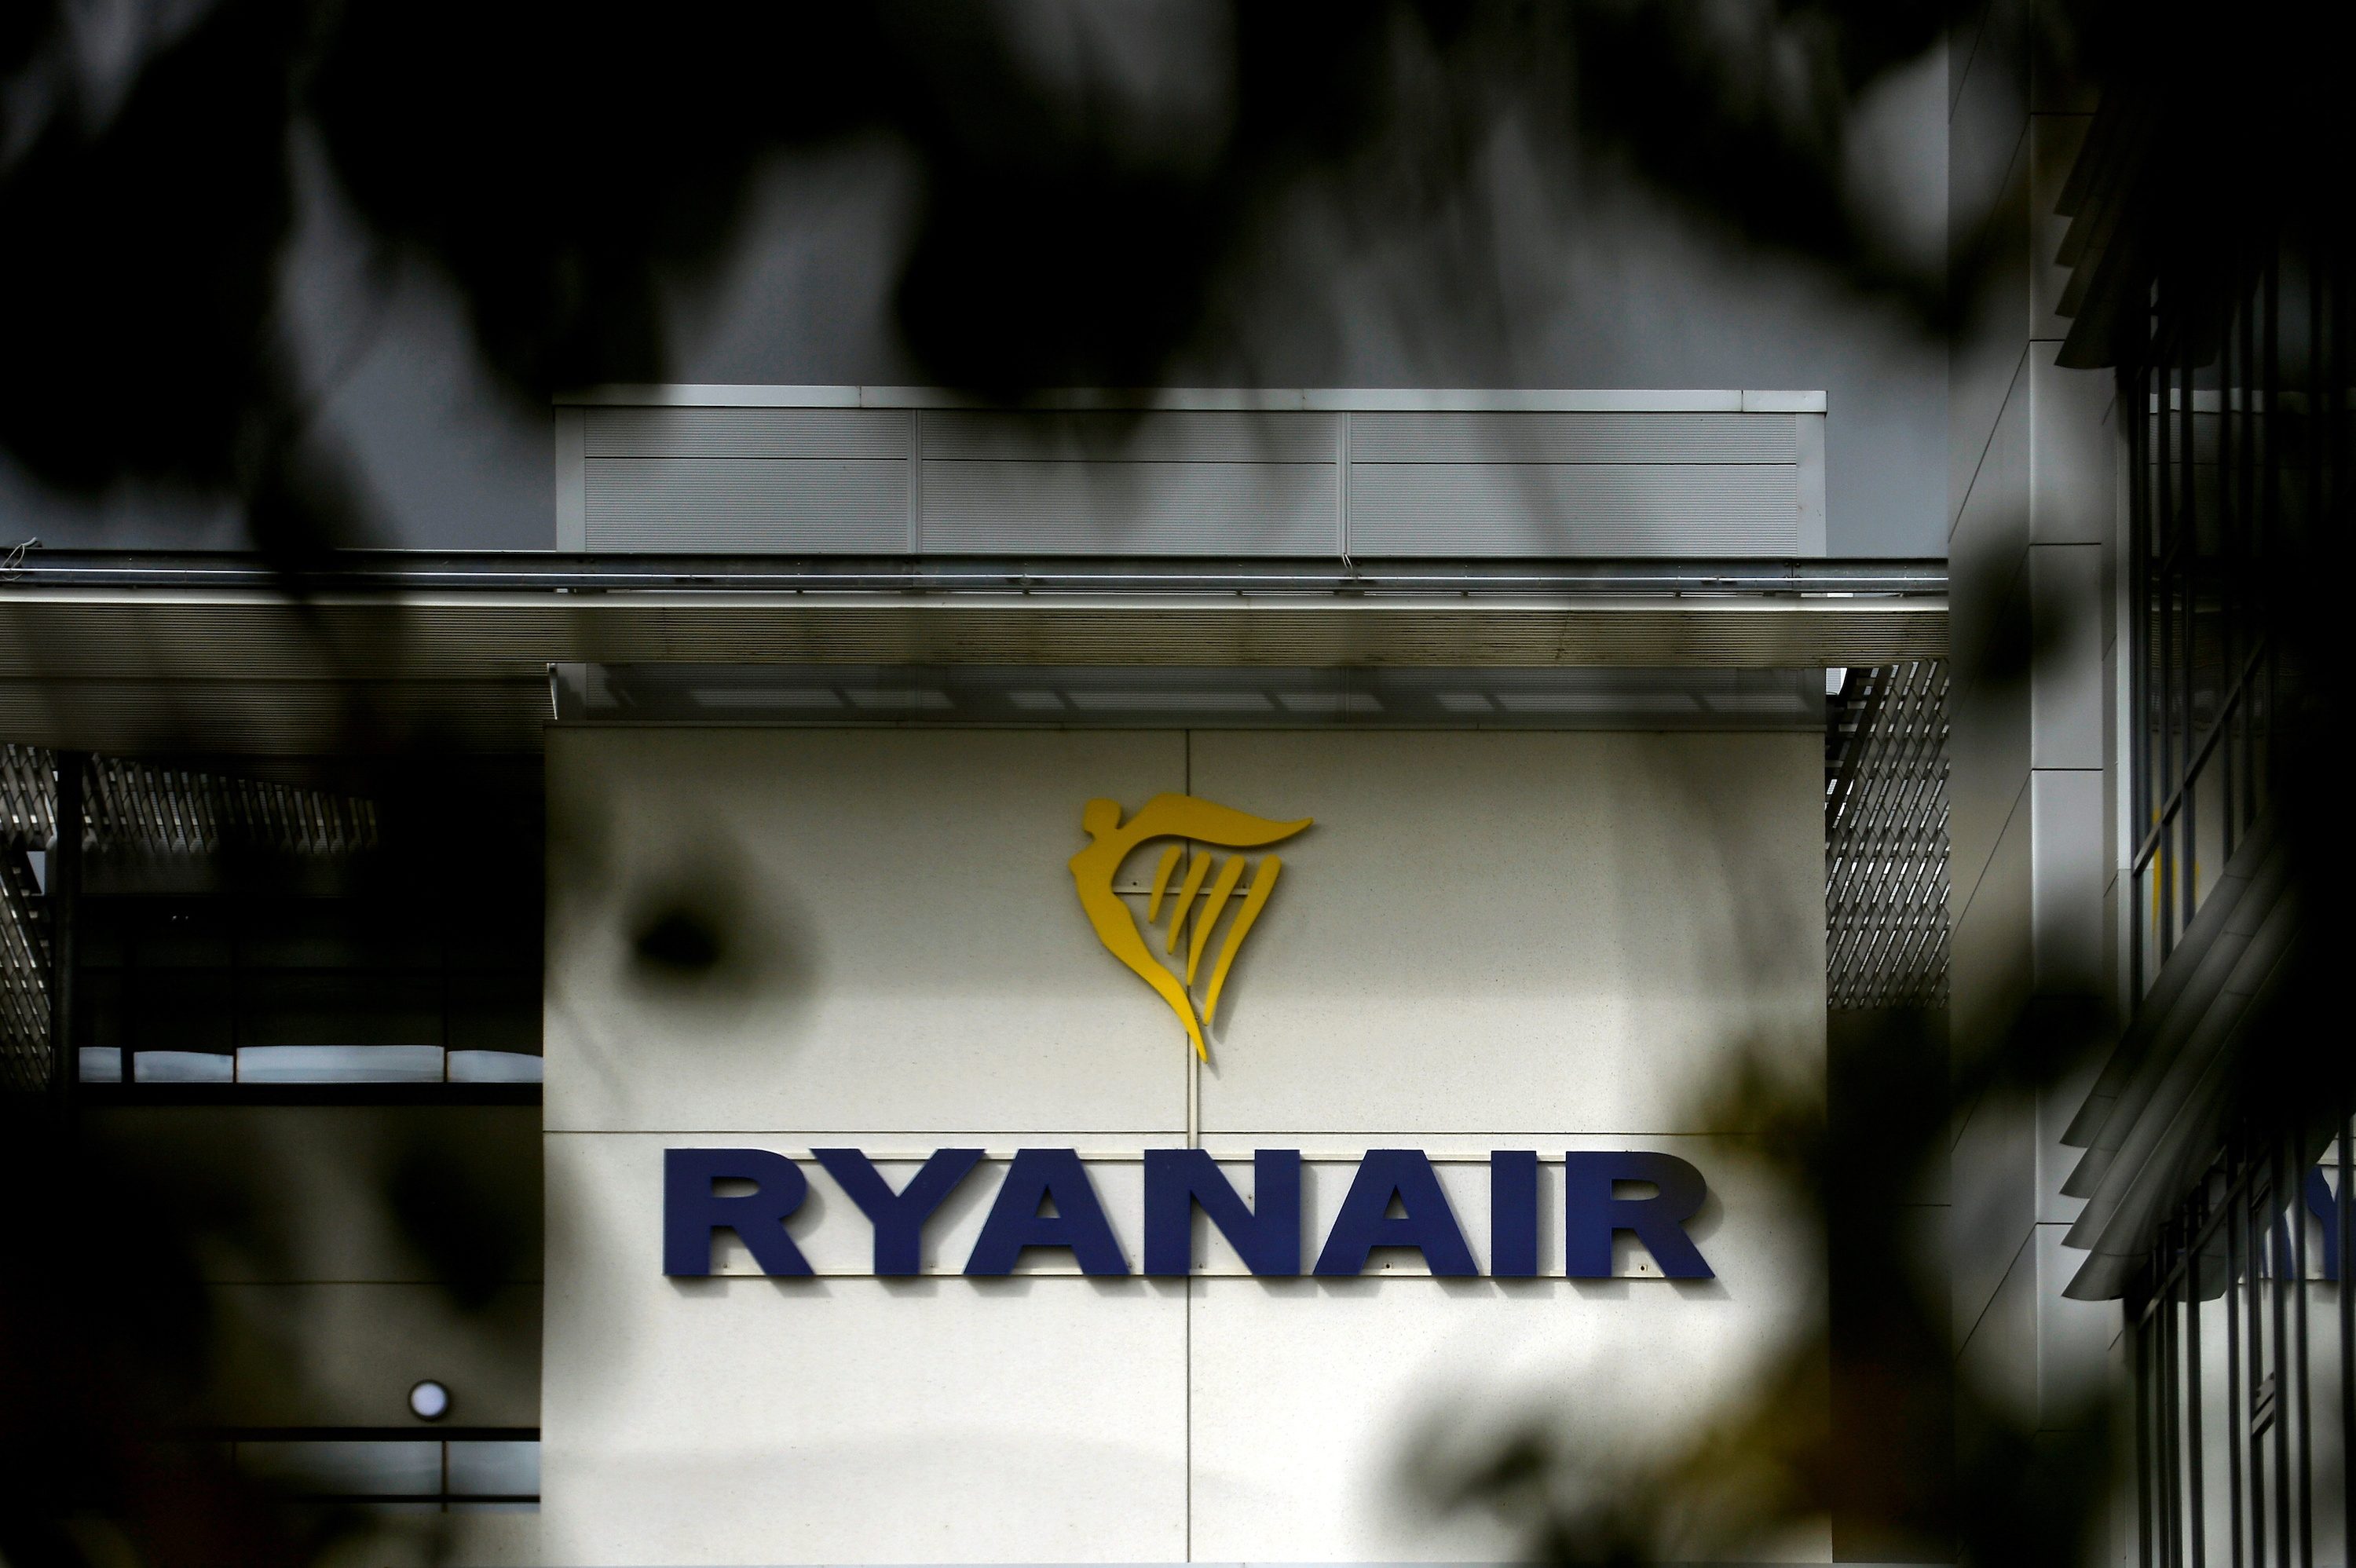 US charges Belarus officials with aircraft piracy over diverted Ryanair flight